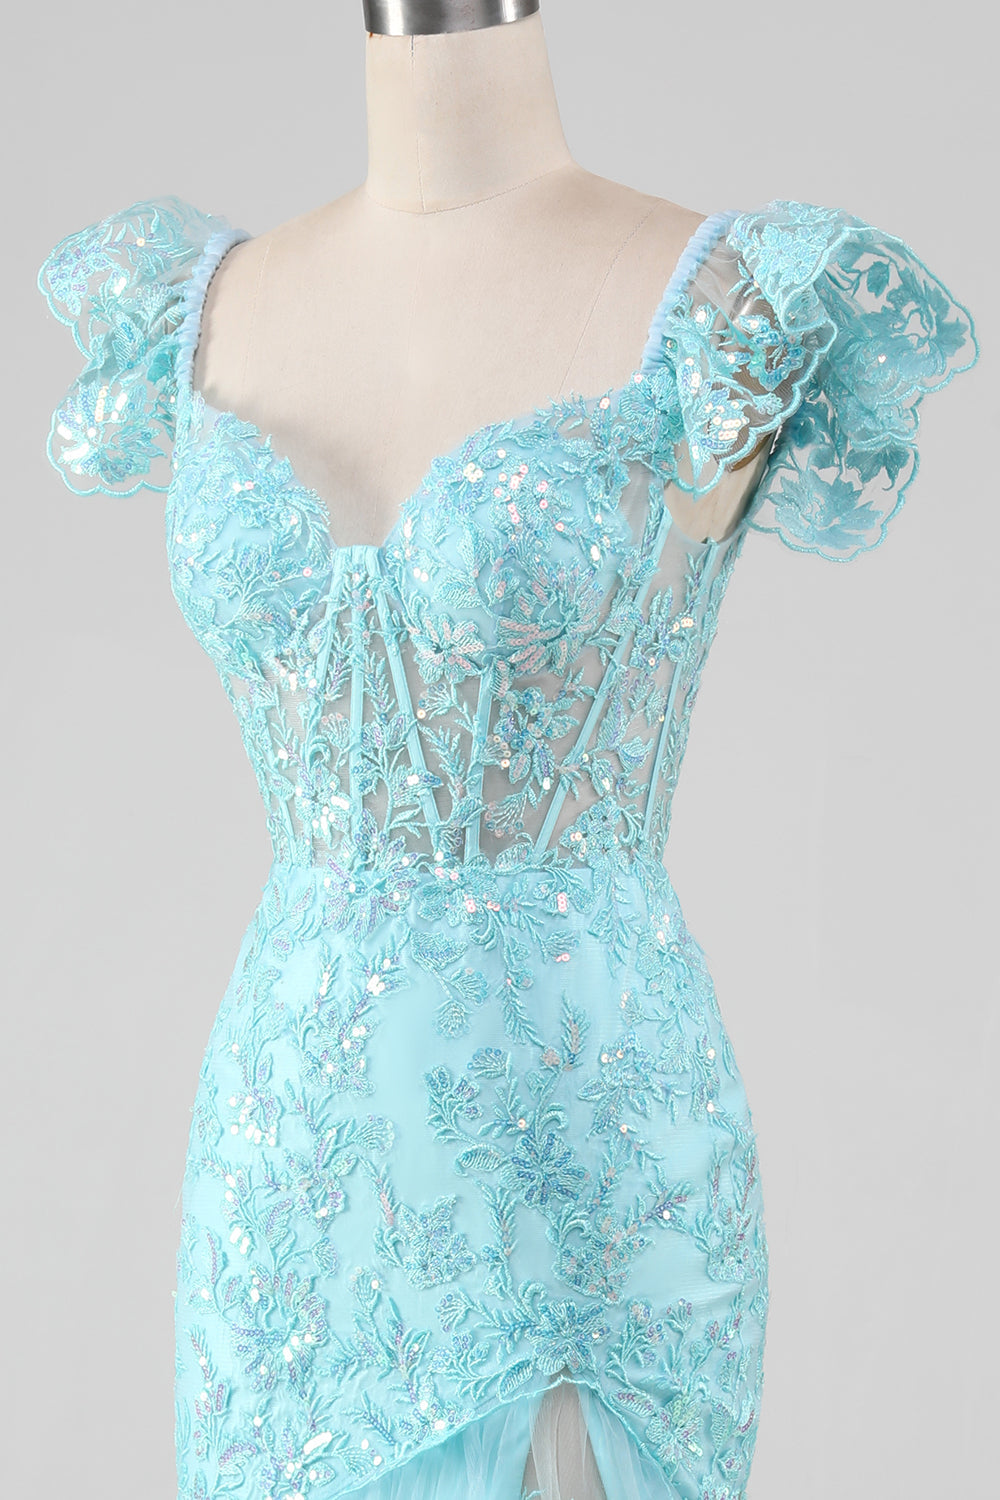 Sky Blue Off the Shoulder Lace and Sequin Mermaid Prom Dress with Slit